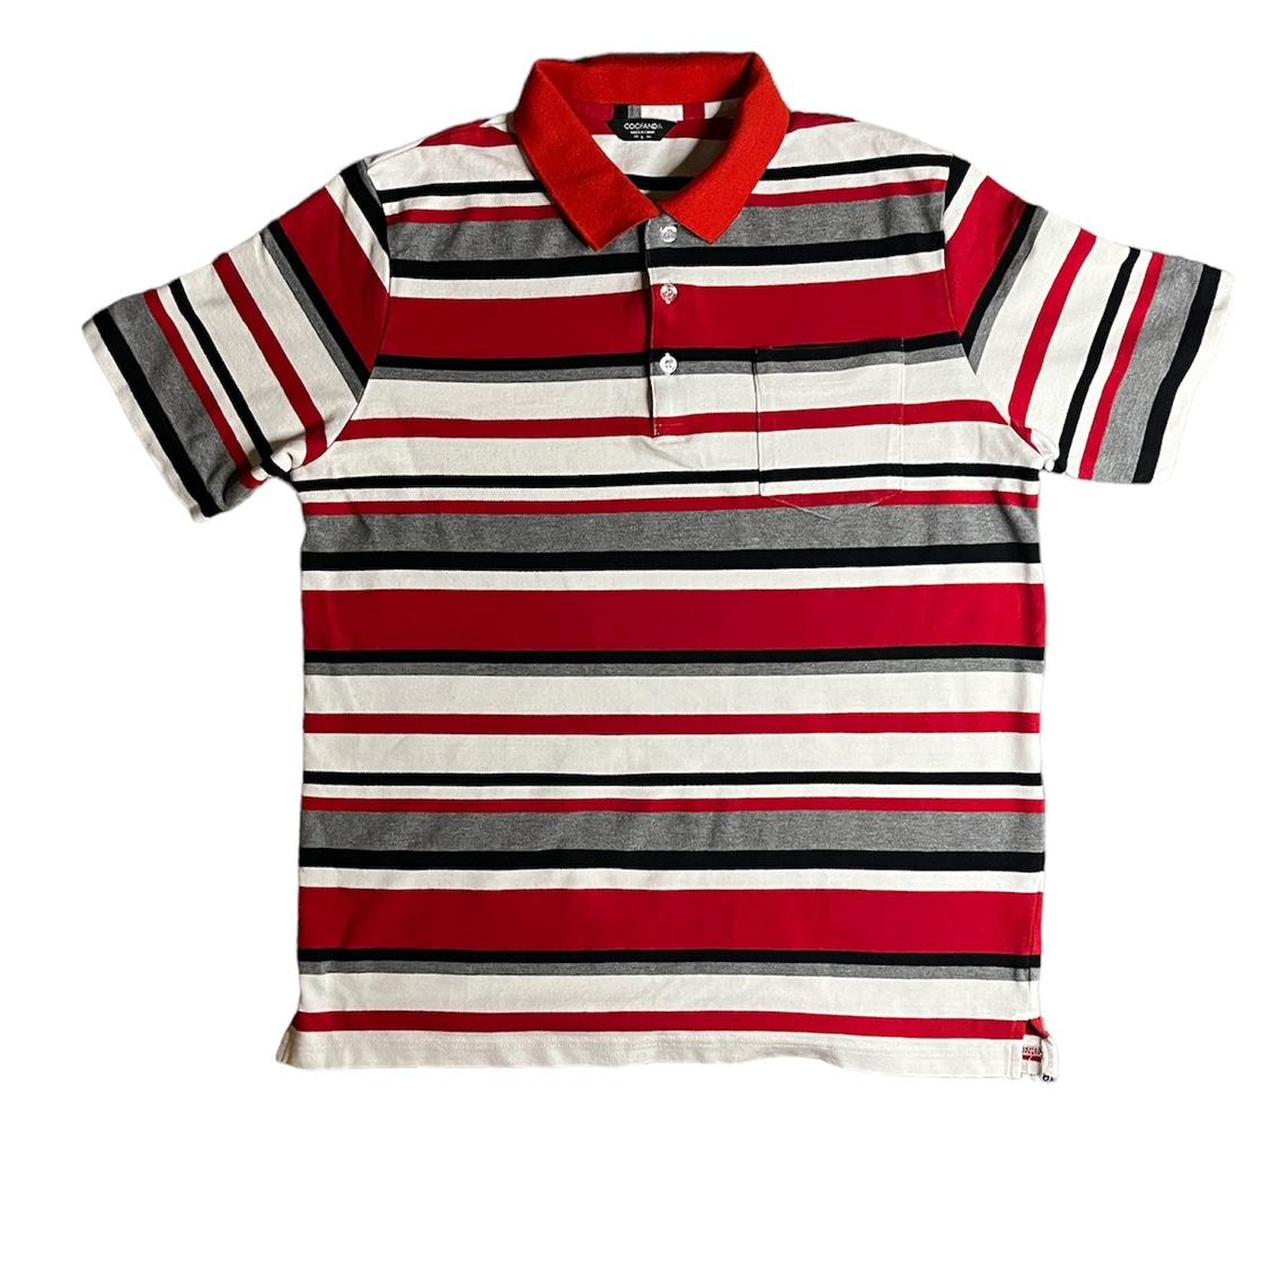 Men's Black and Red Polo-shirts